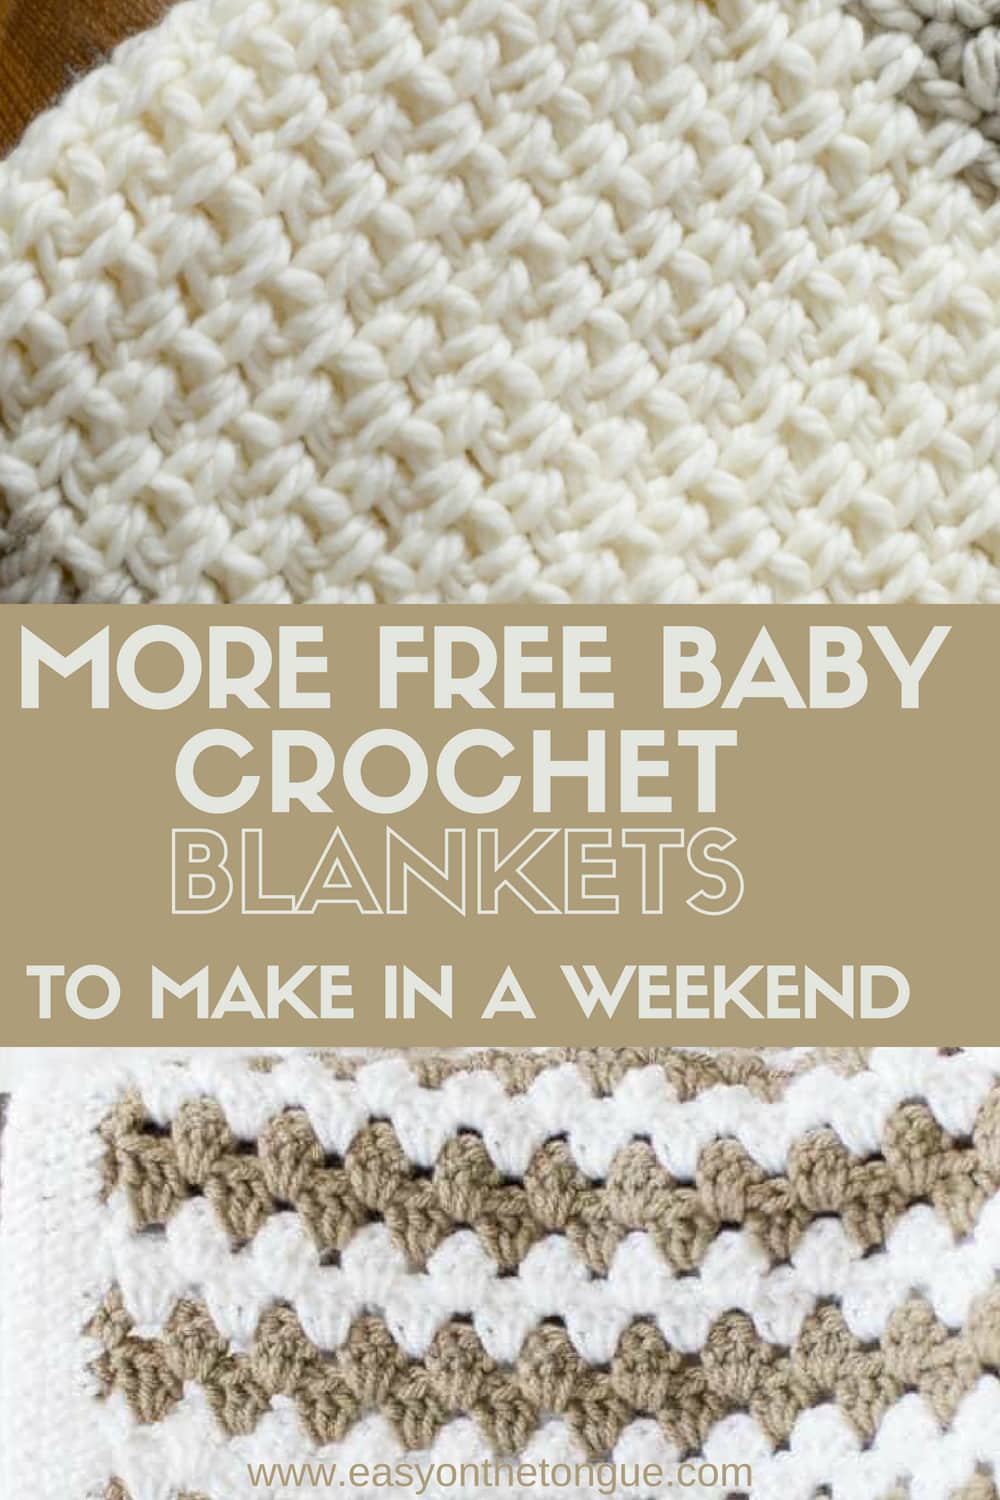 More Free Baby Crochet Blankets to make in a weekend More Free Baby Crochet Blanket Patterns to do in a weekend